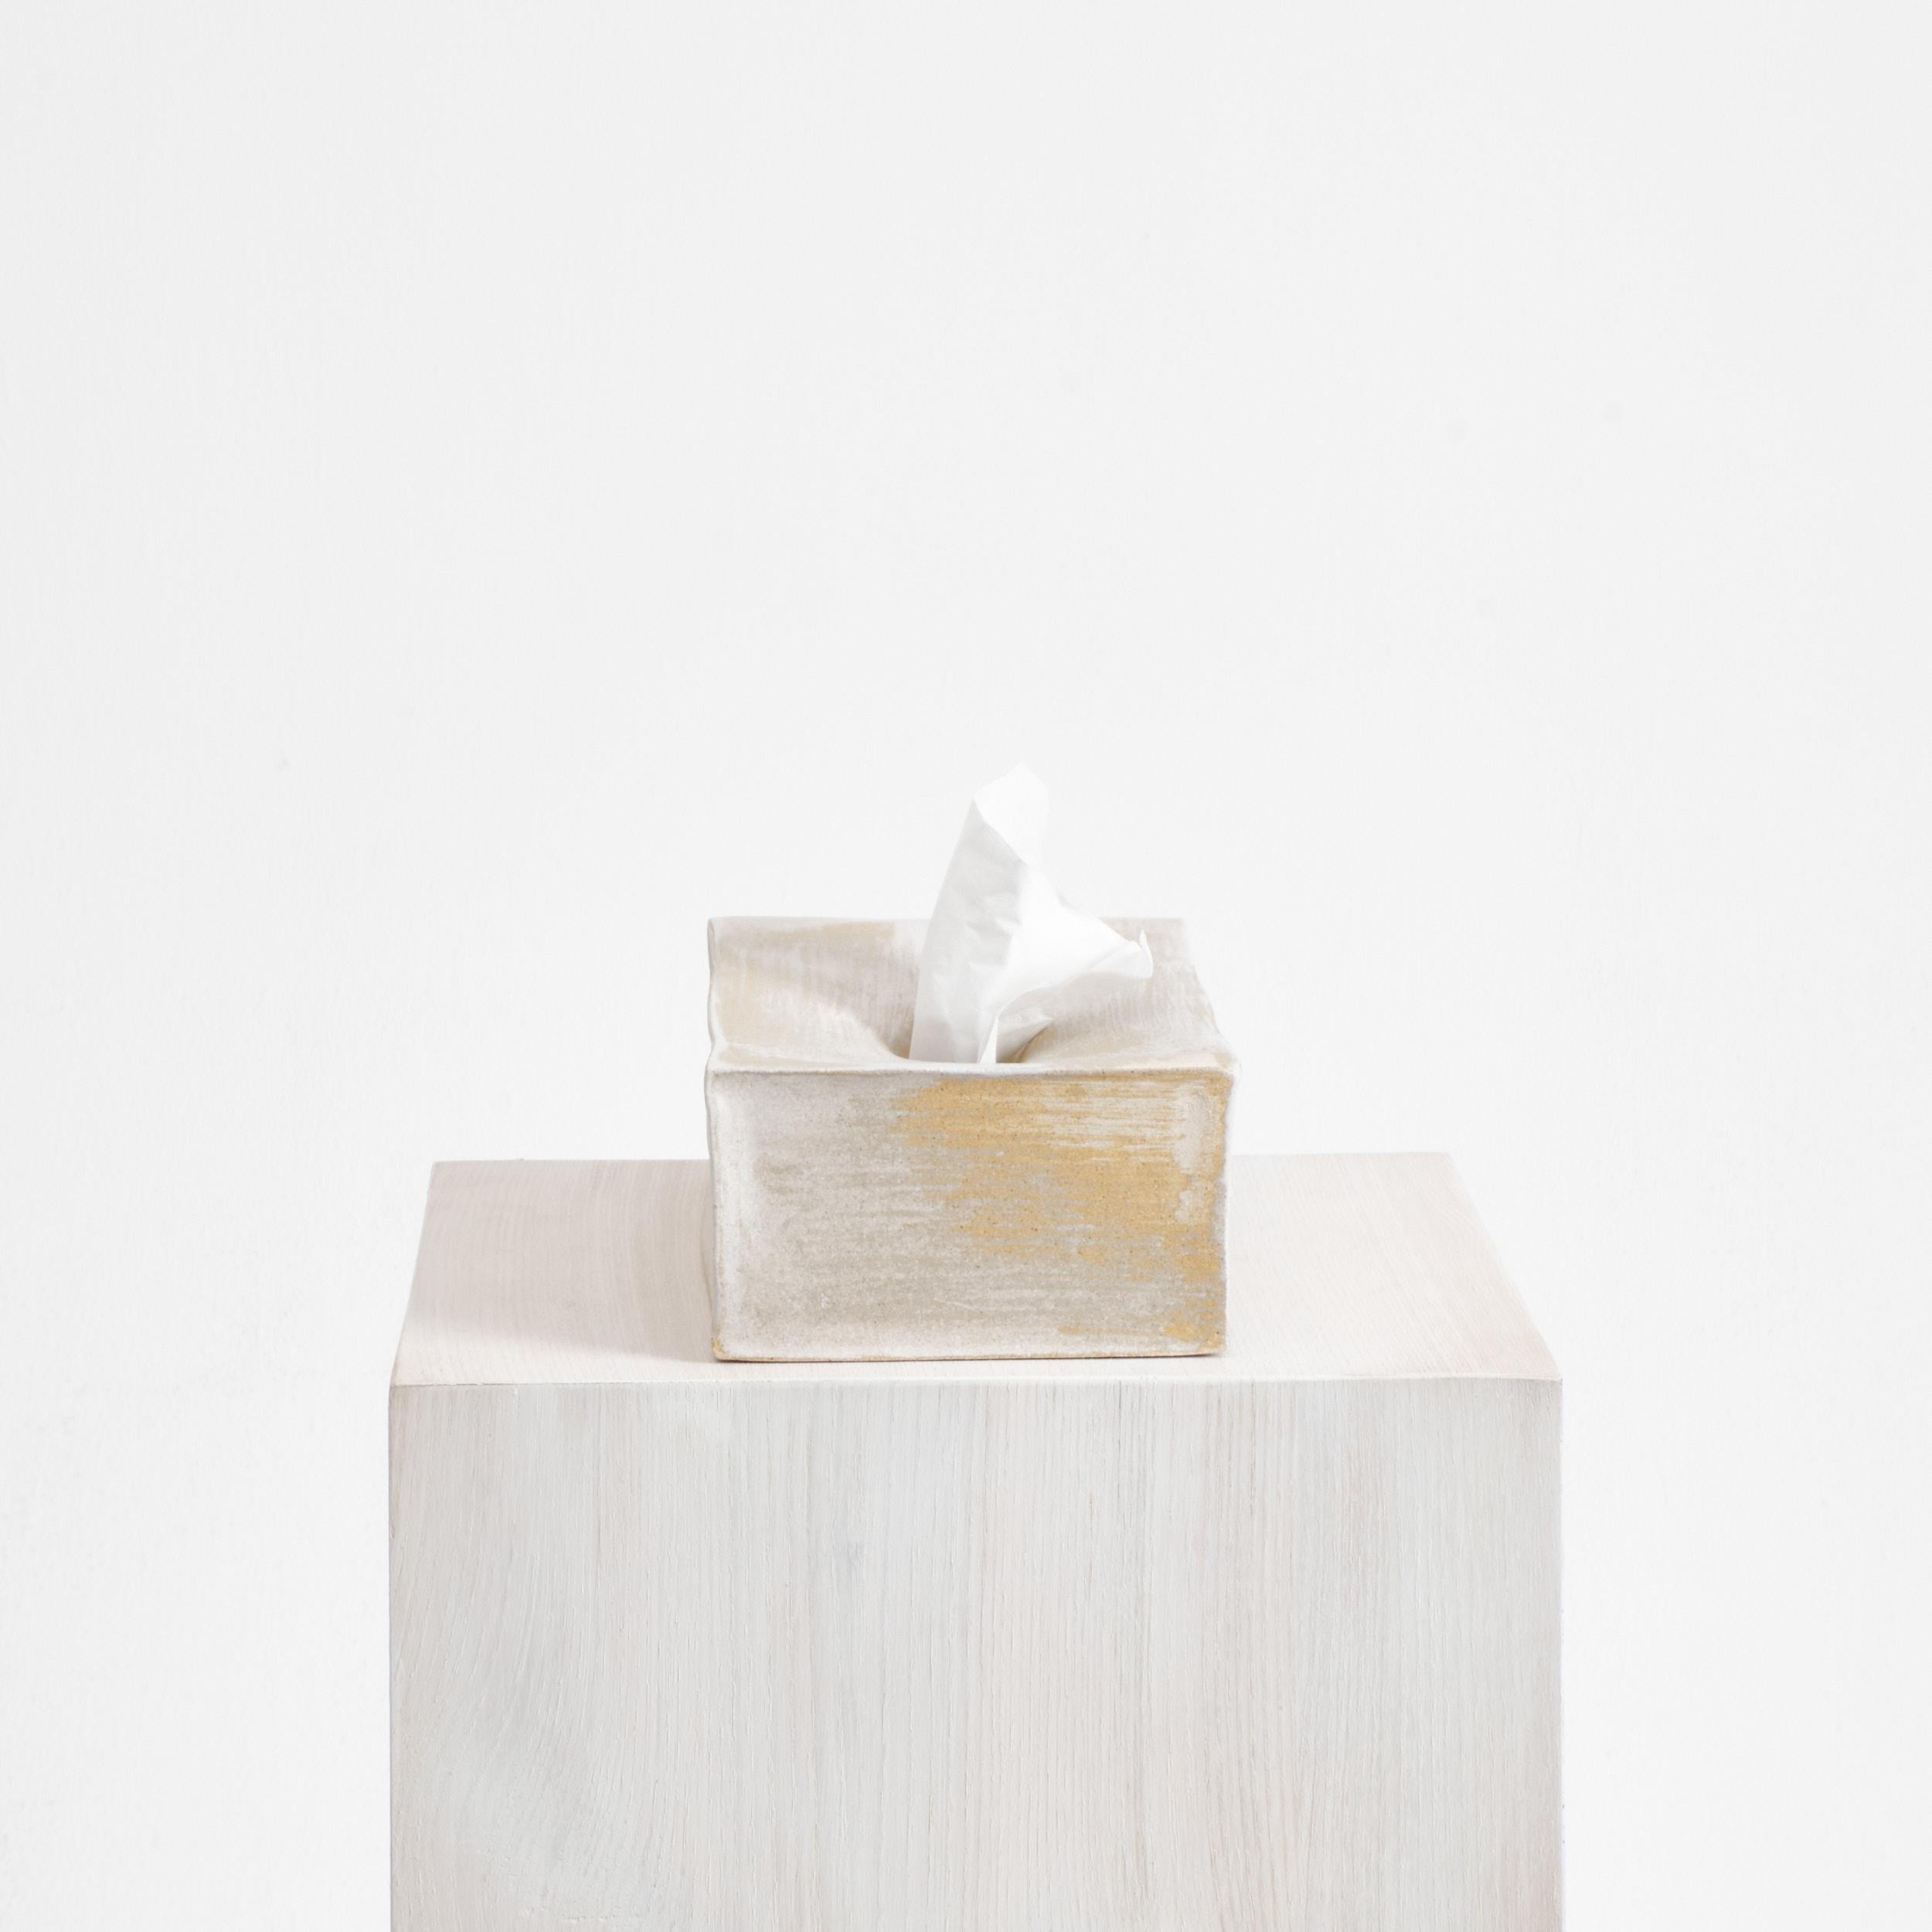 Ceramic Tissue Box in brushed White
Designed by Project 213A in 2023

Artisanal ceramic tissue box created by skilled artisans in Project 213A's own ceramic workshop.
The tissue box is created by hand and finished with a brushed glaze revealing the